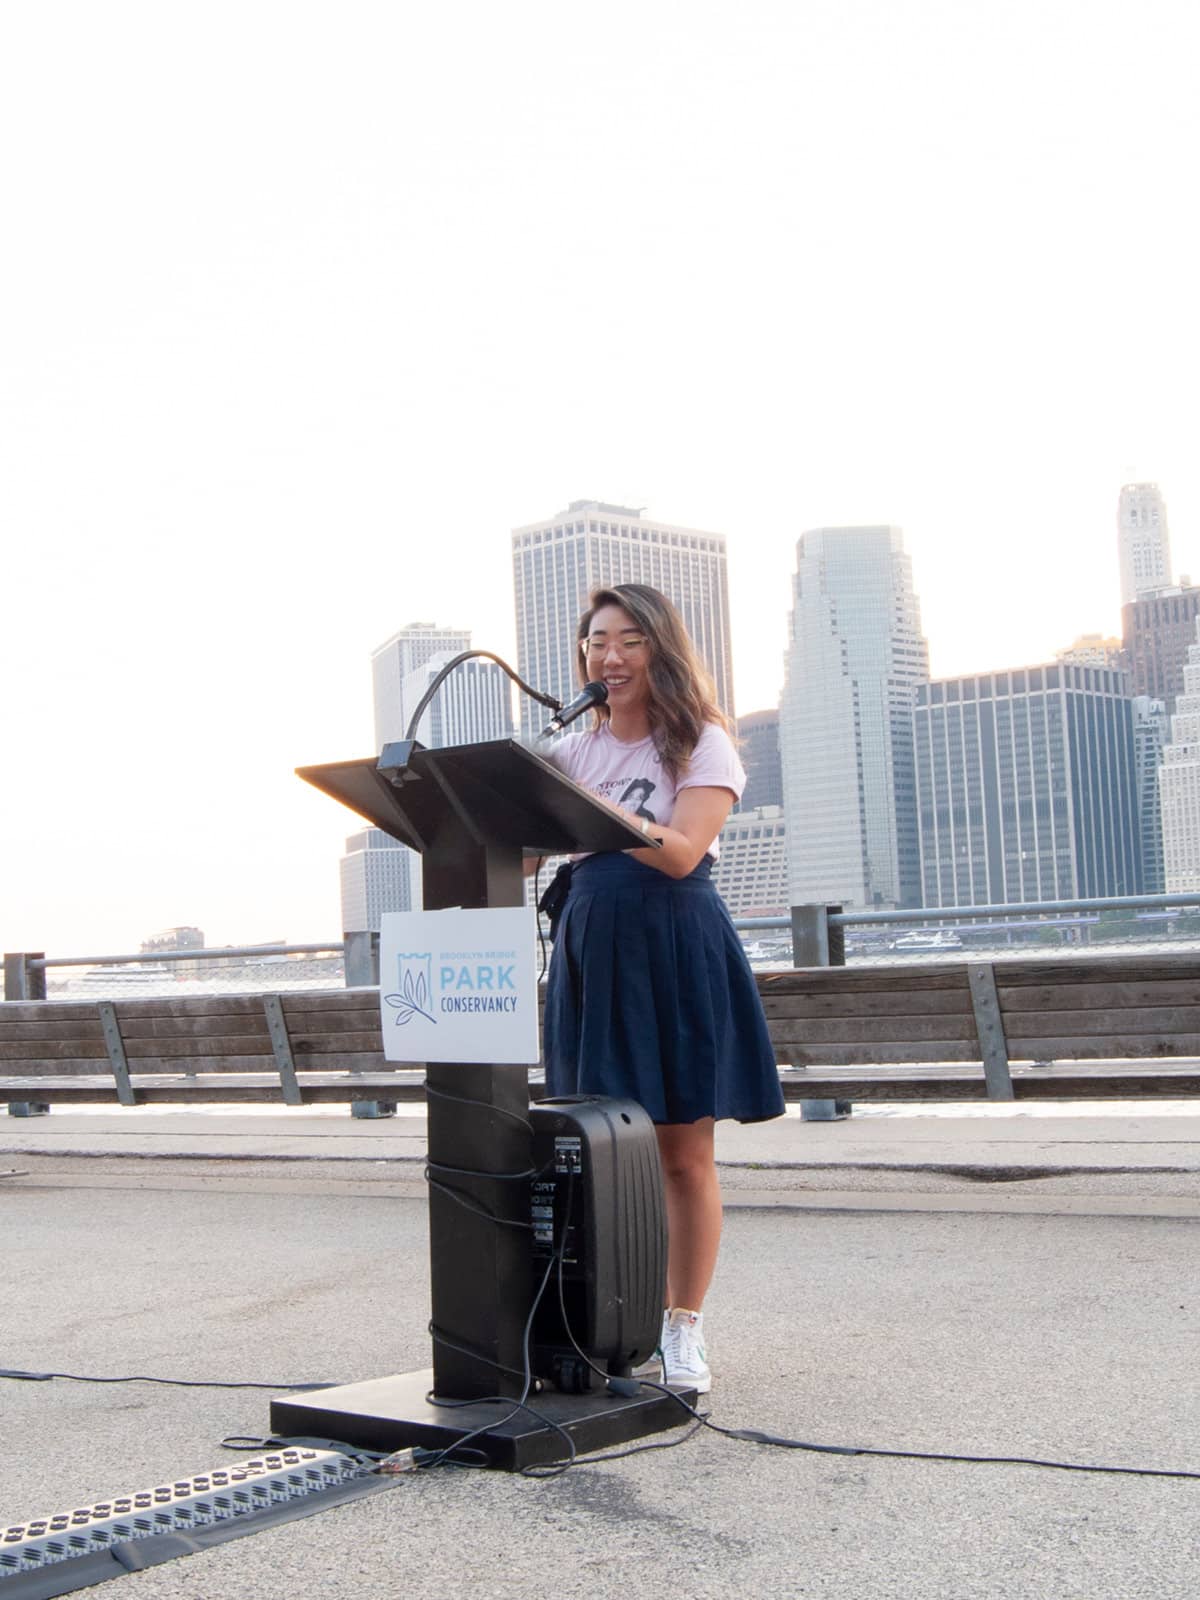 Woman standing at a podium reading out loud at sunset. Lower Manhattan is seen in the background.